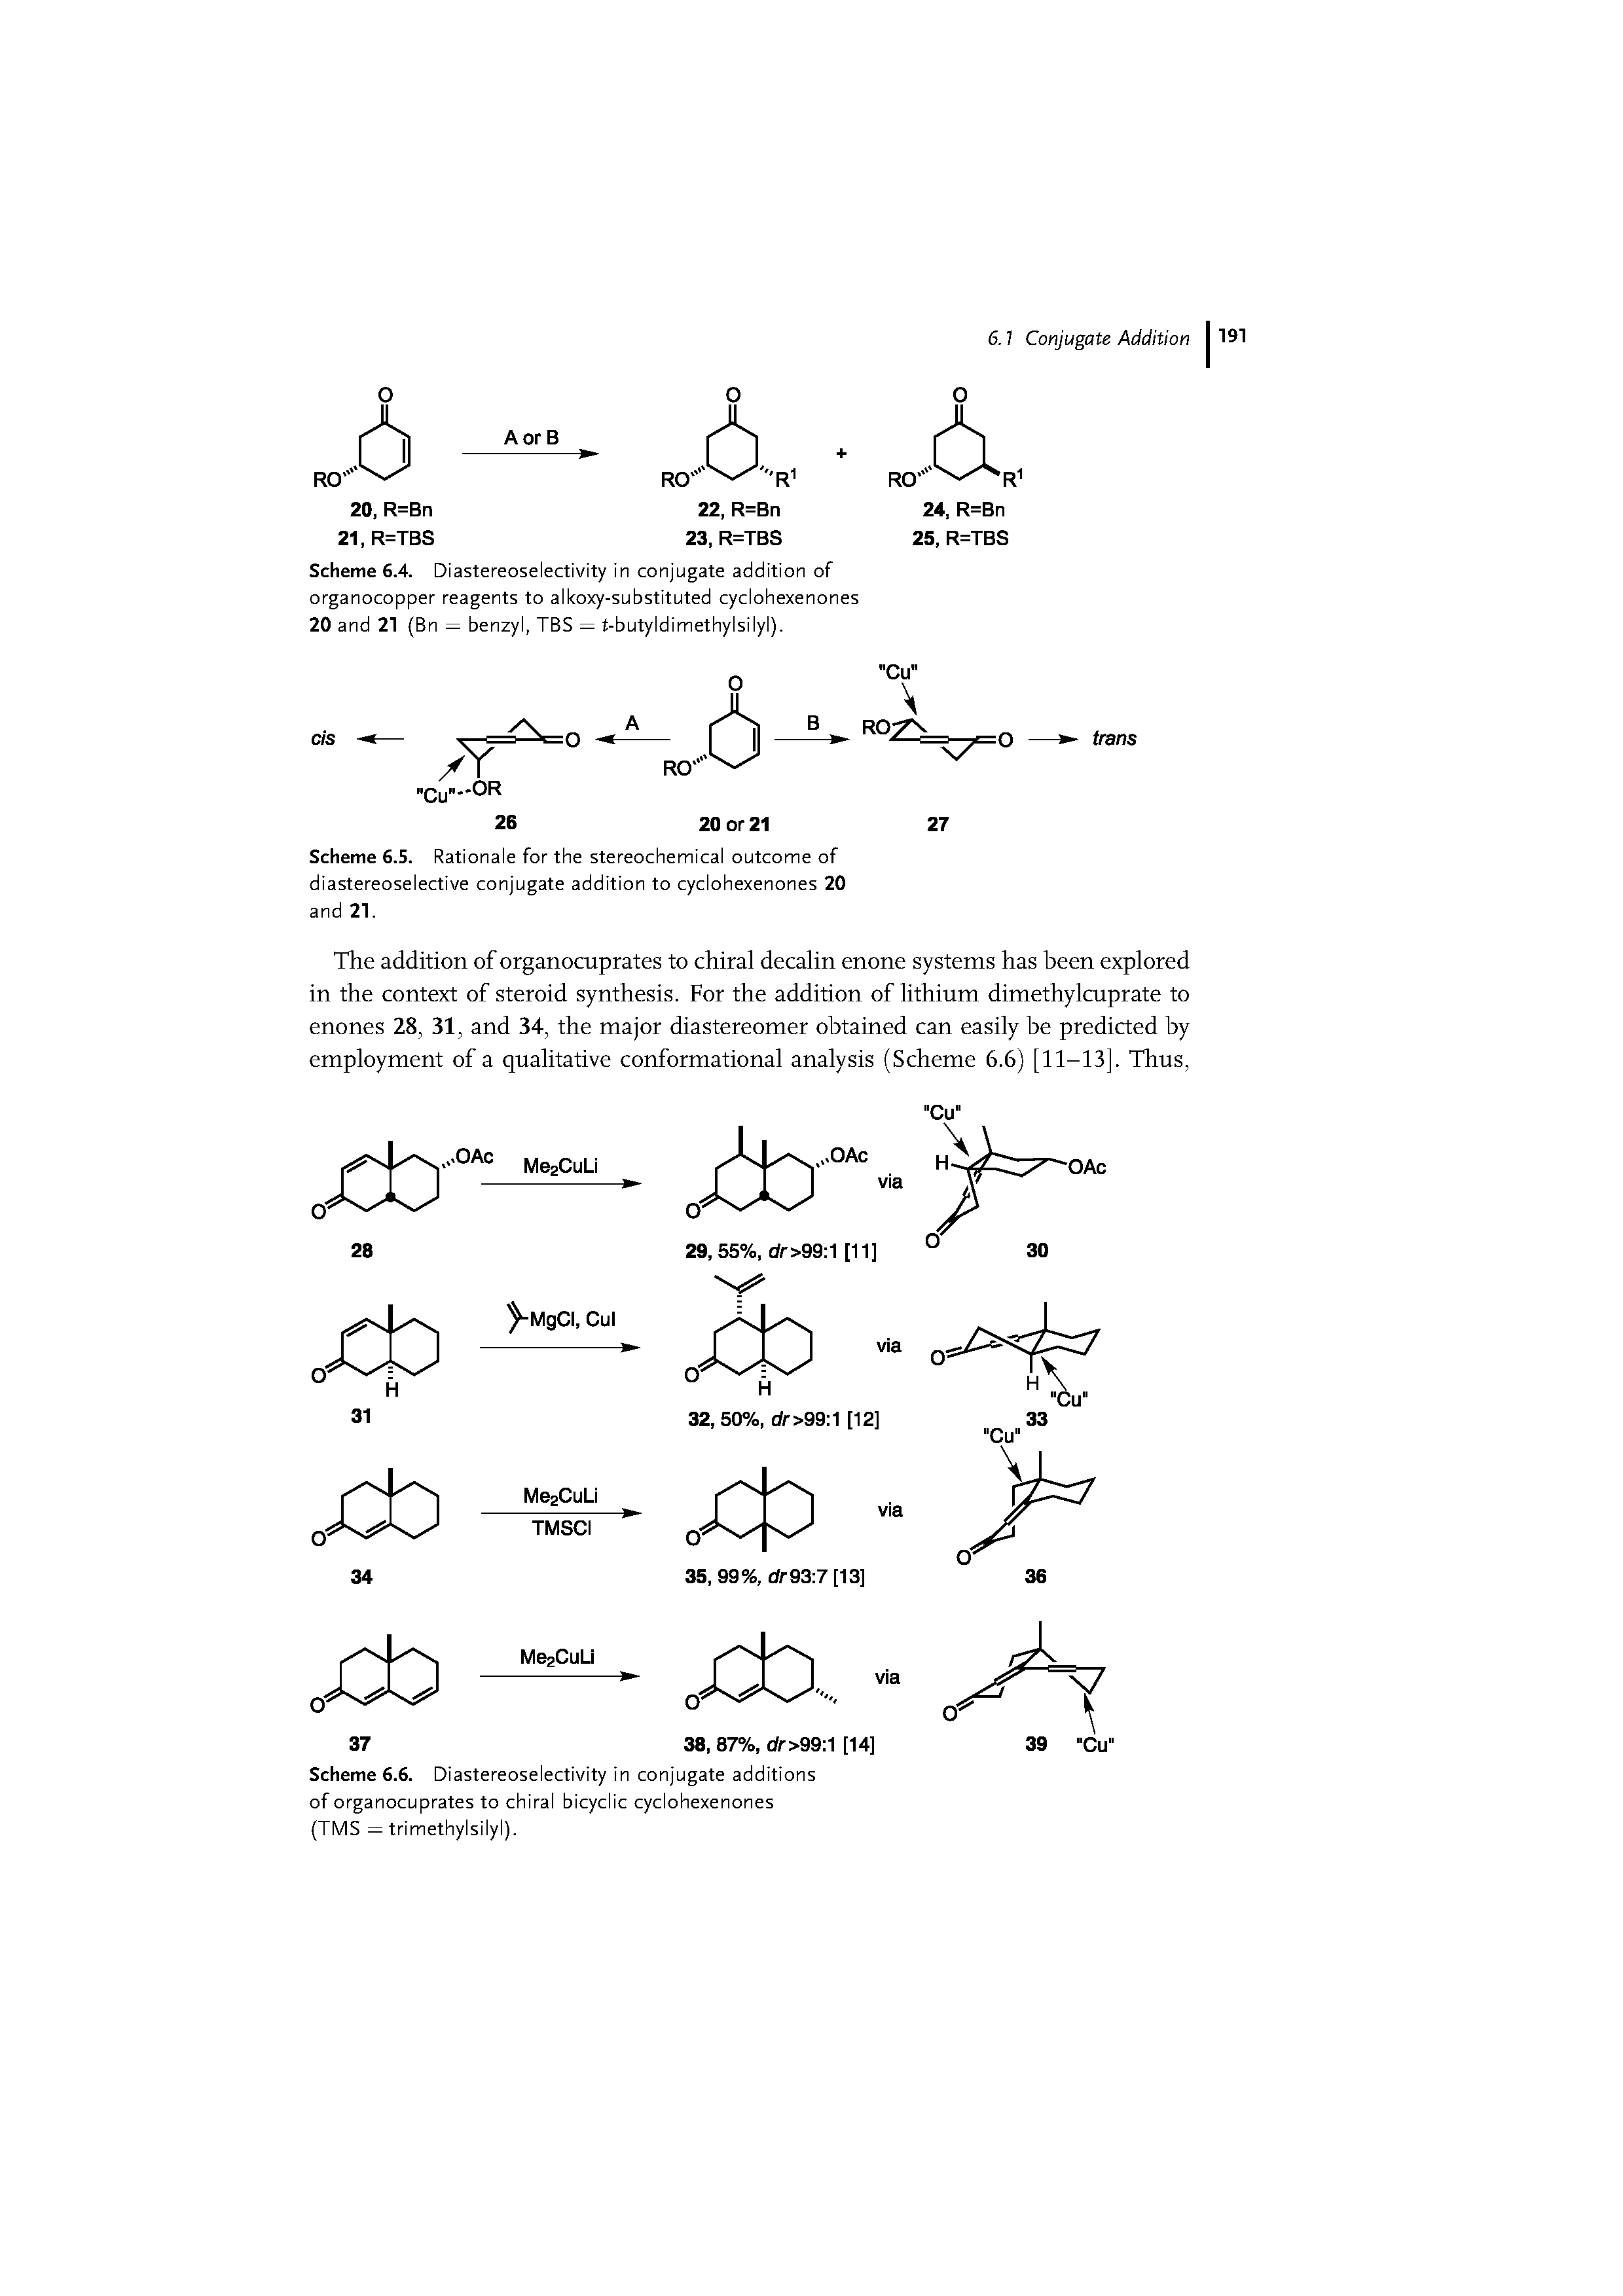 Scheme 6.5. Rationale for the stereochemical outcome of diastereoselective conjugate addition to cyclohexenones 20 and 21.